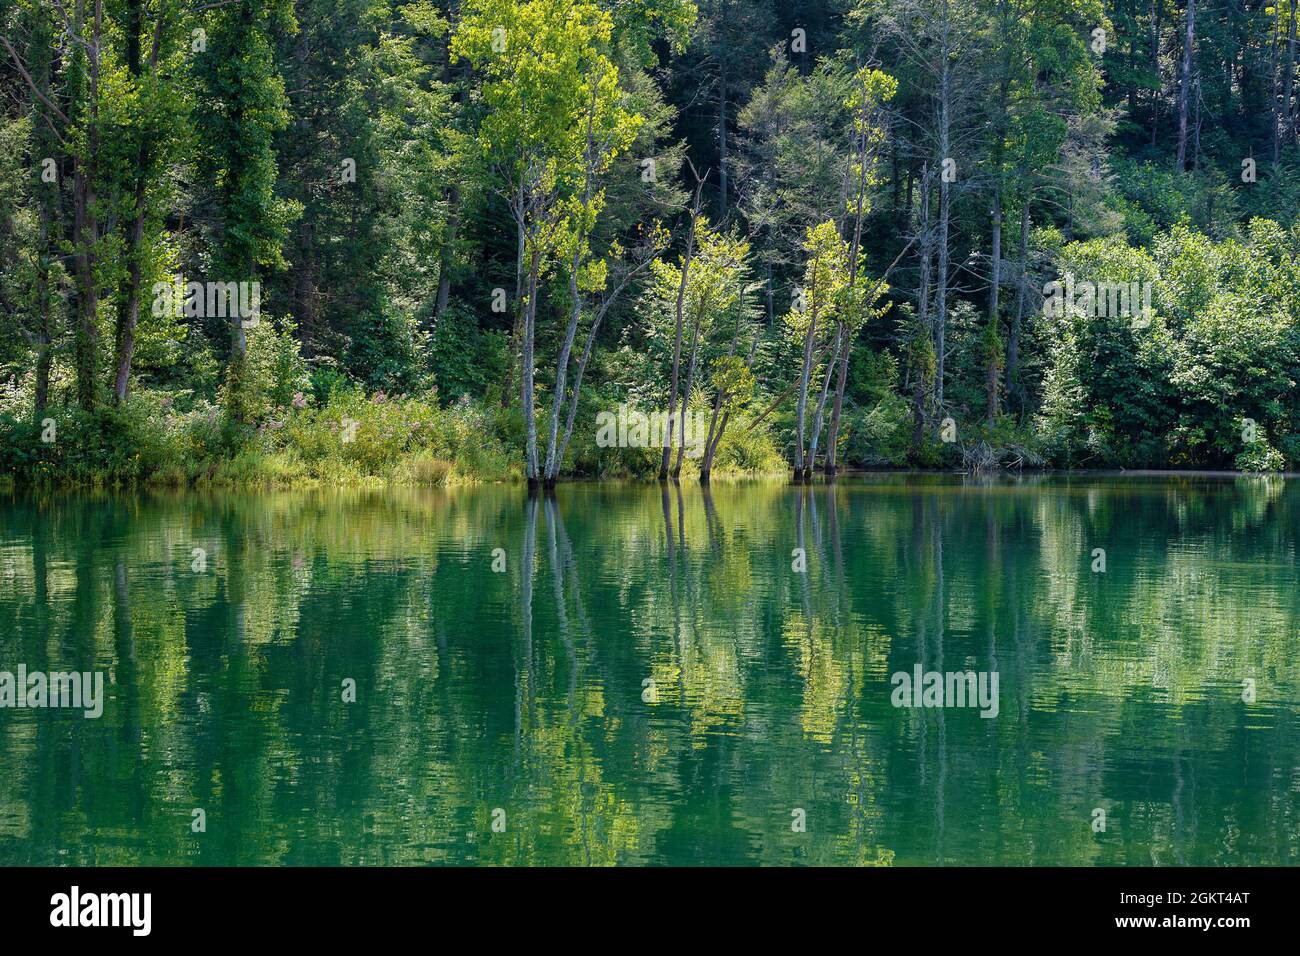 Scenic Landscape view falong the banks of the reflecting clear water of Watauga River in Tennessee. Stock Photo